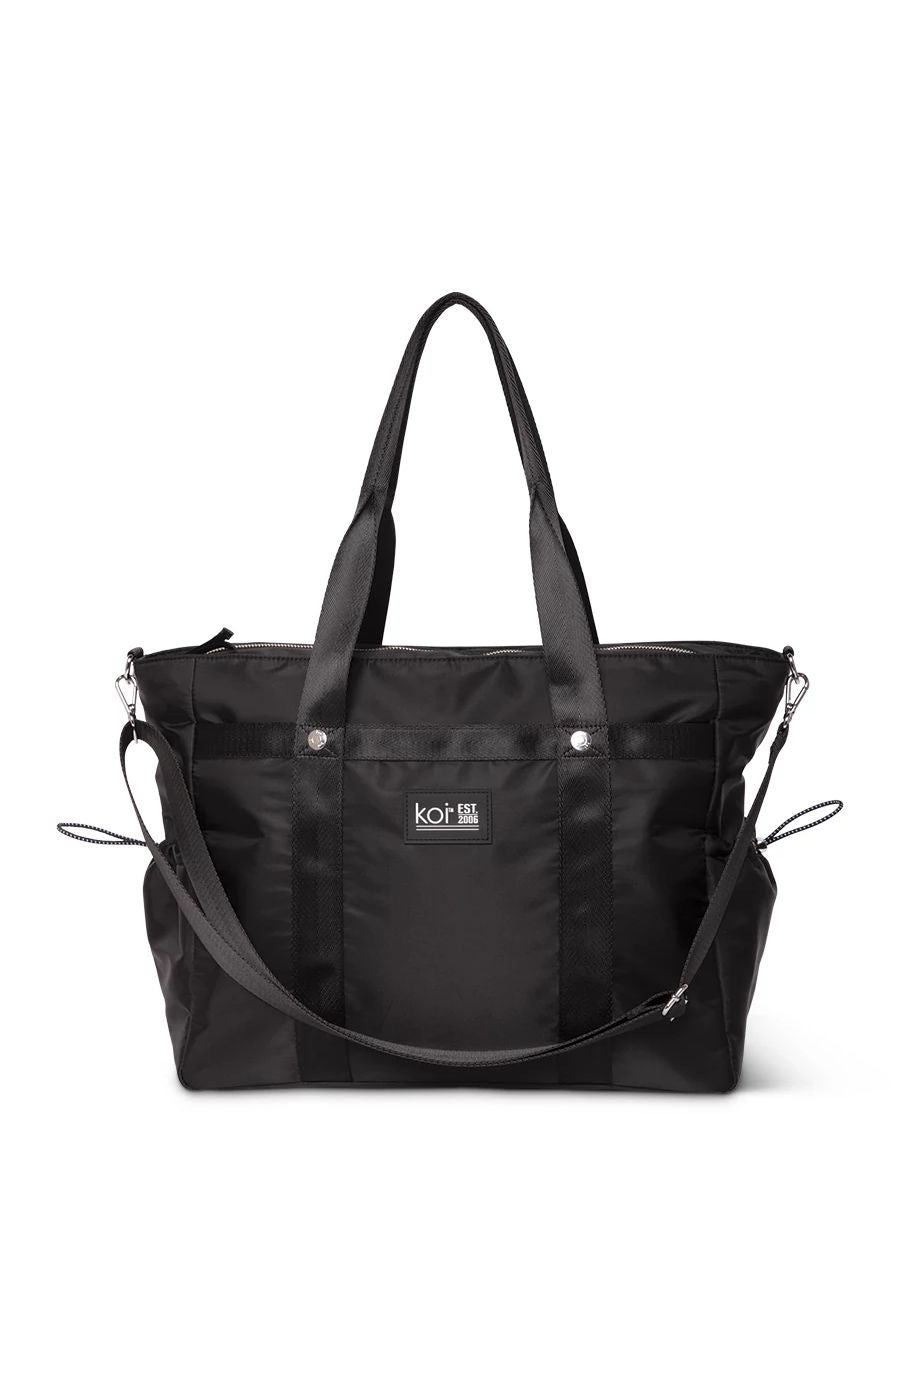 all-you-can-fit-tote-black